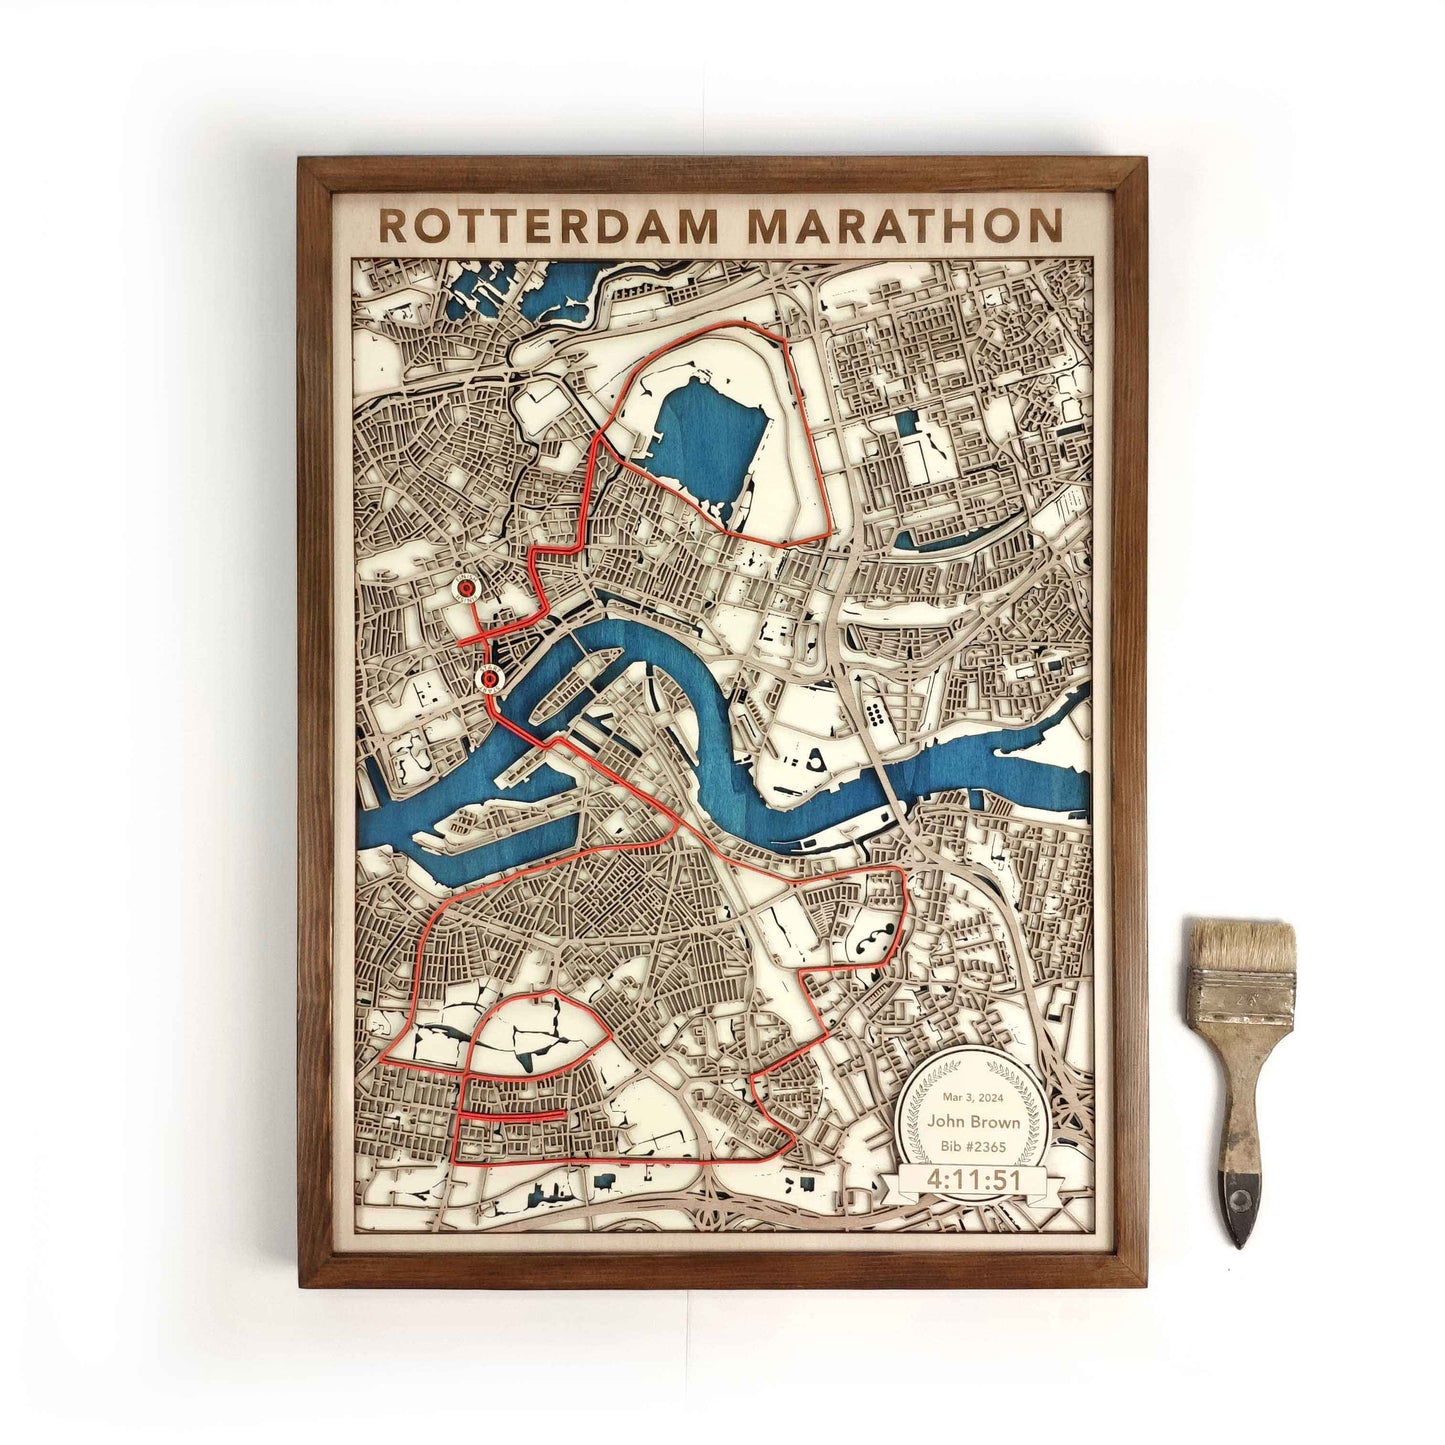 Rotterdam Marathon Commemorative Wooden Route Map – Collector's Item by CityWood - Custom Wood Map Art - Unique Laser Cut Engraved - Anniversary Gift